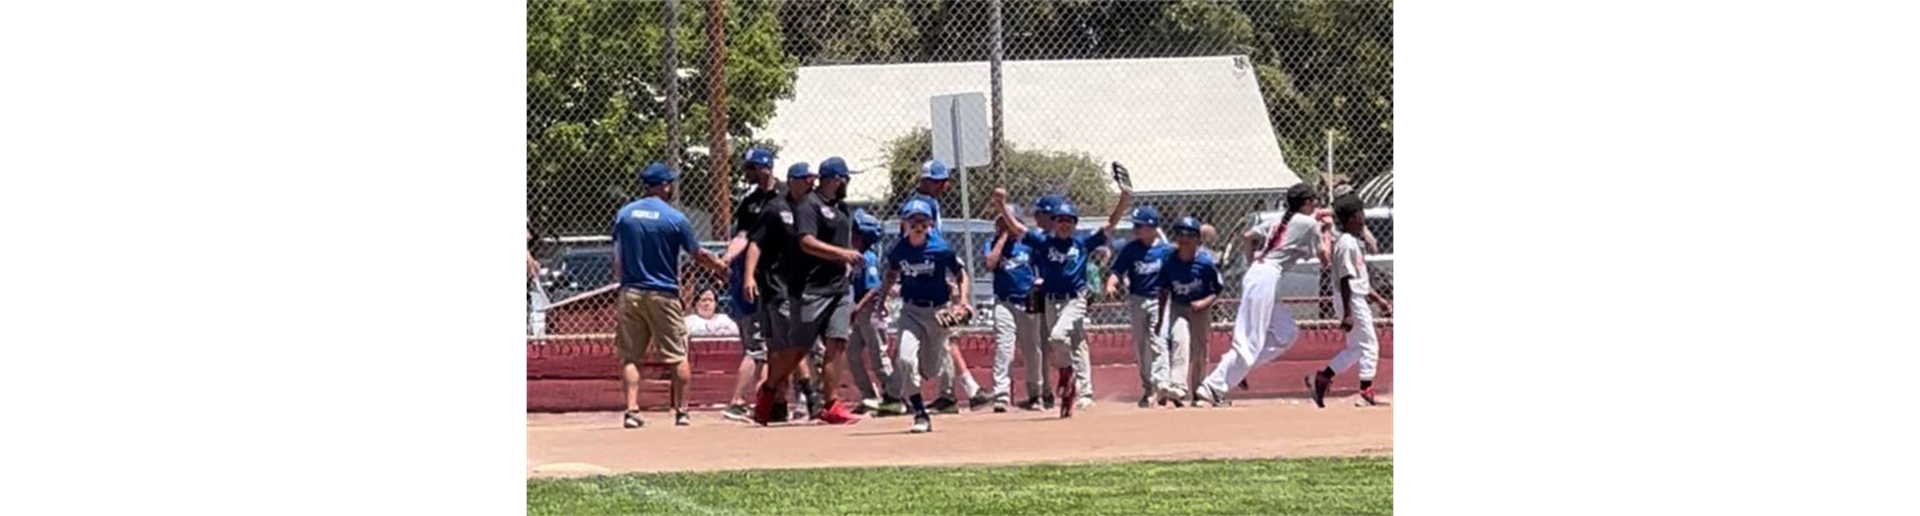 SPLL Minors Royals Victorious in 1st Round